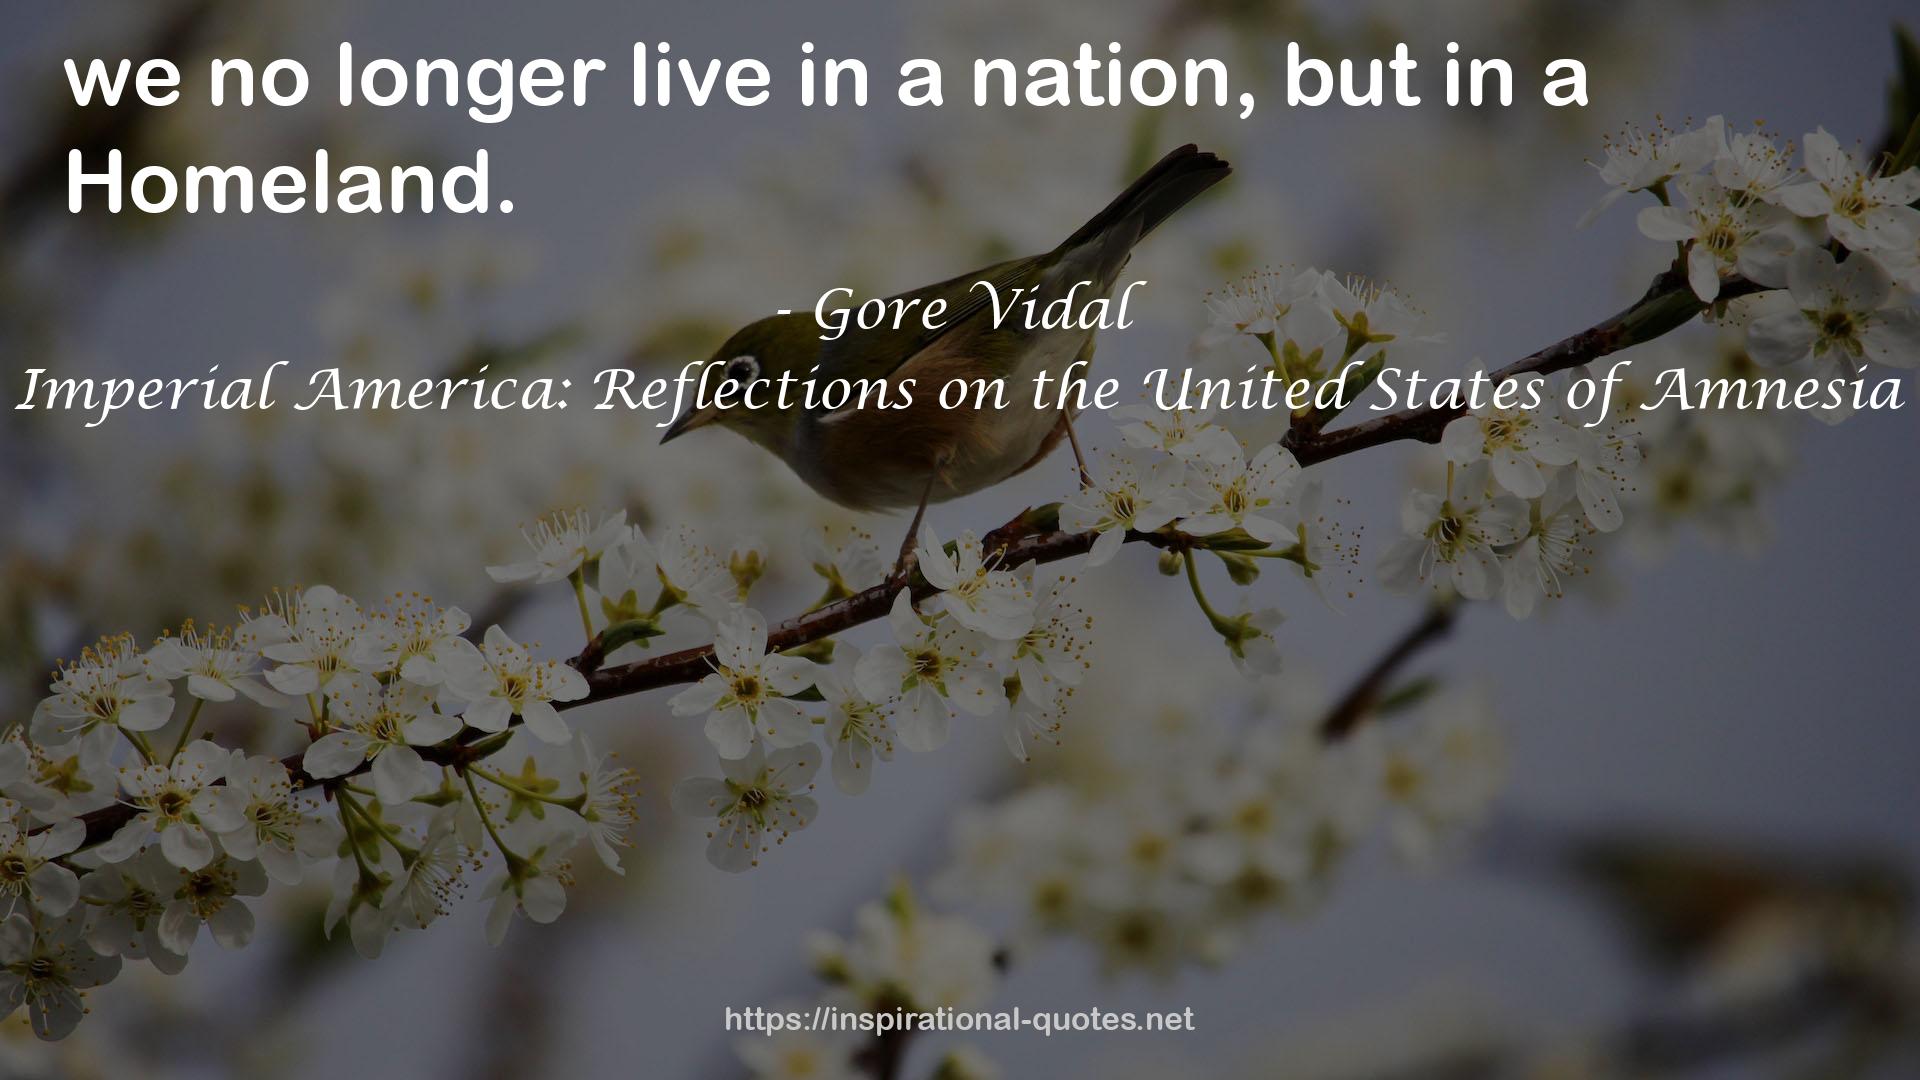 Imperial America: Reflections on the United States of Amnesia QUOTES